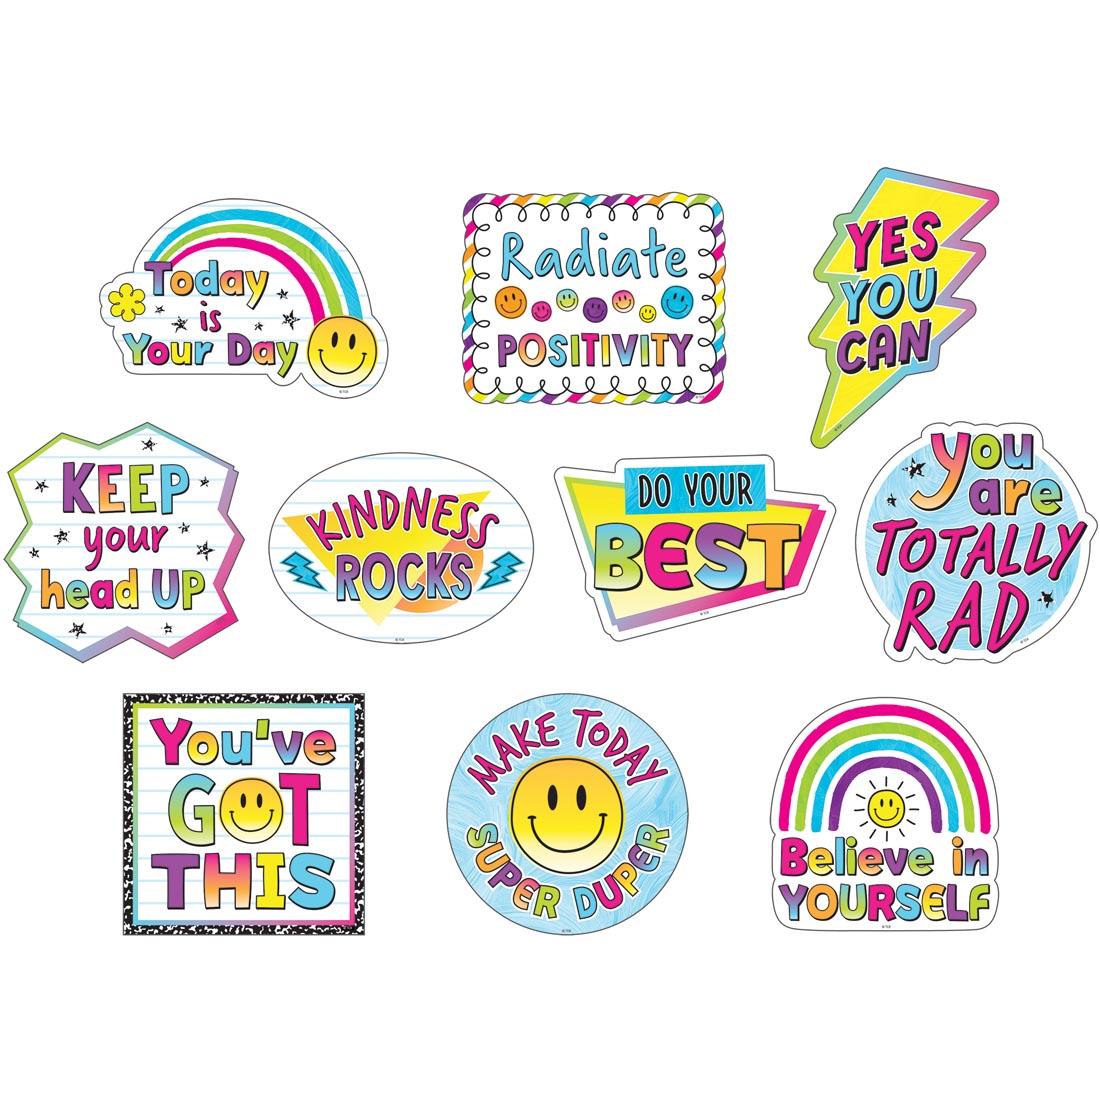 Positive Sayings Accents from the Brights 4Ever collection by Teacher Created Resources